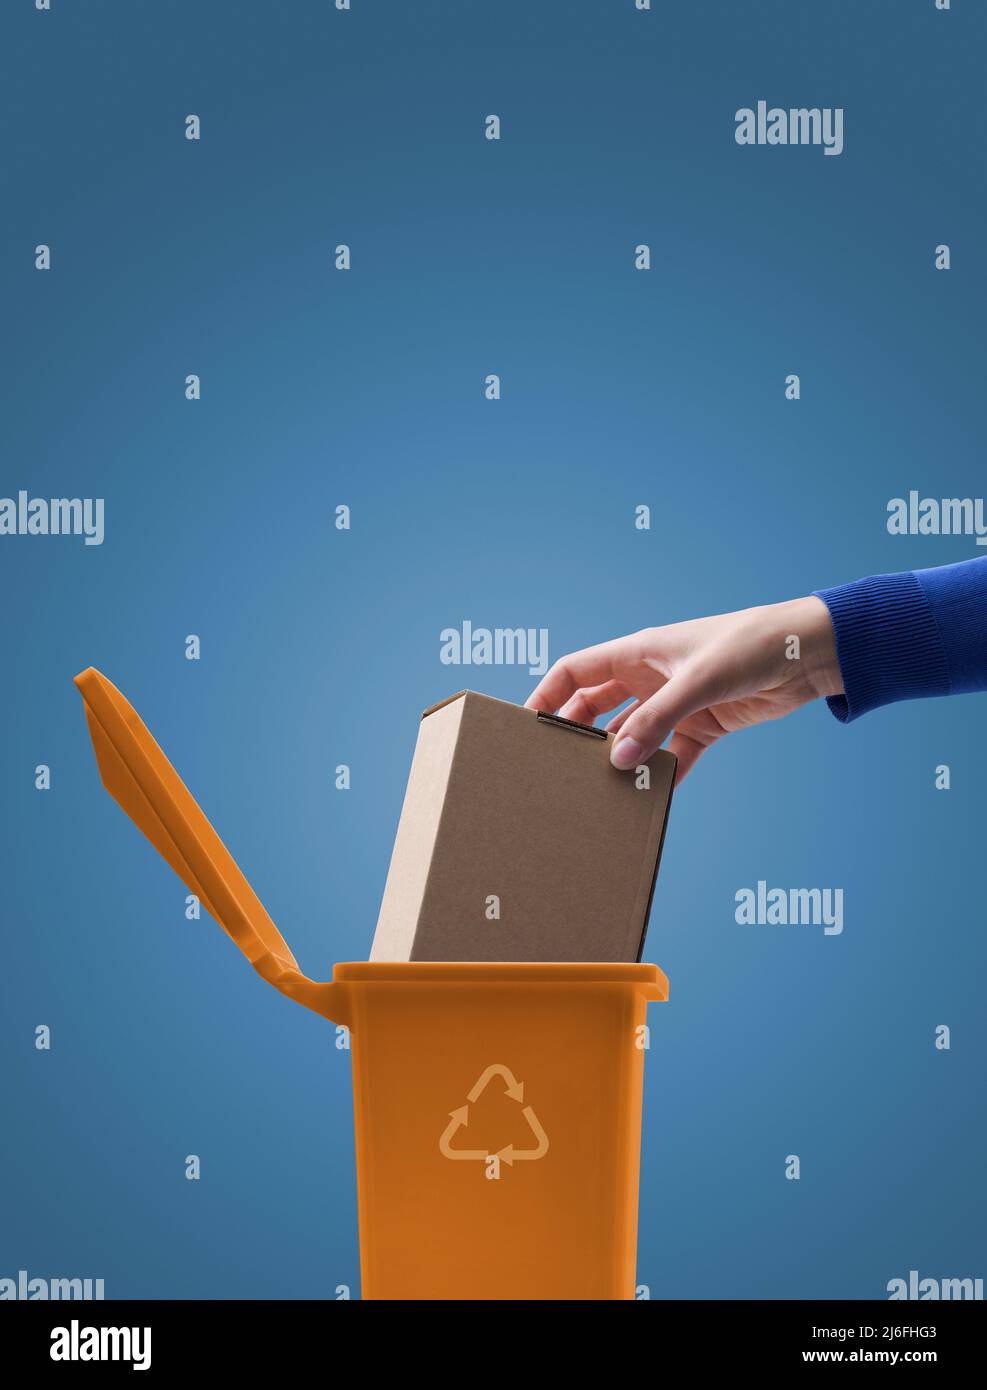 Woman putting a cardboard box package in the trash bin, recycling and waste sorting concept Stock Photo